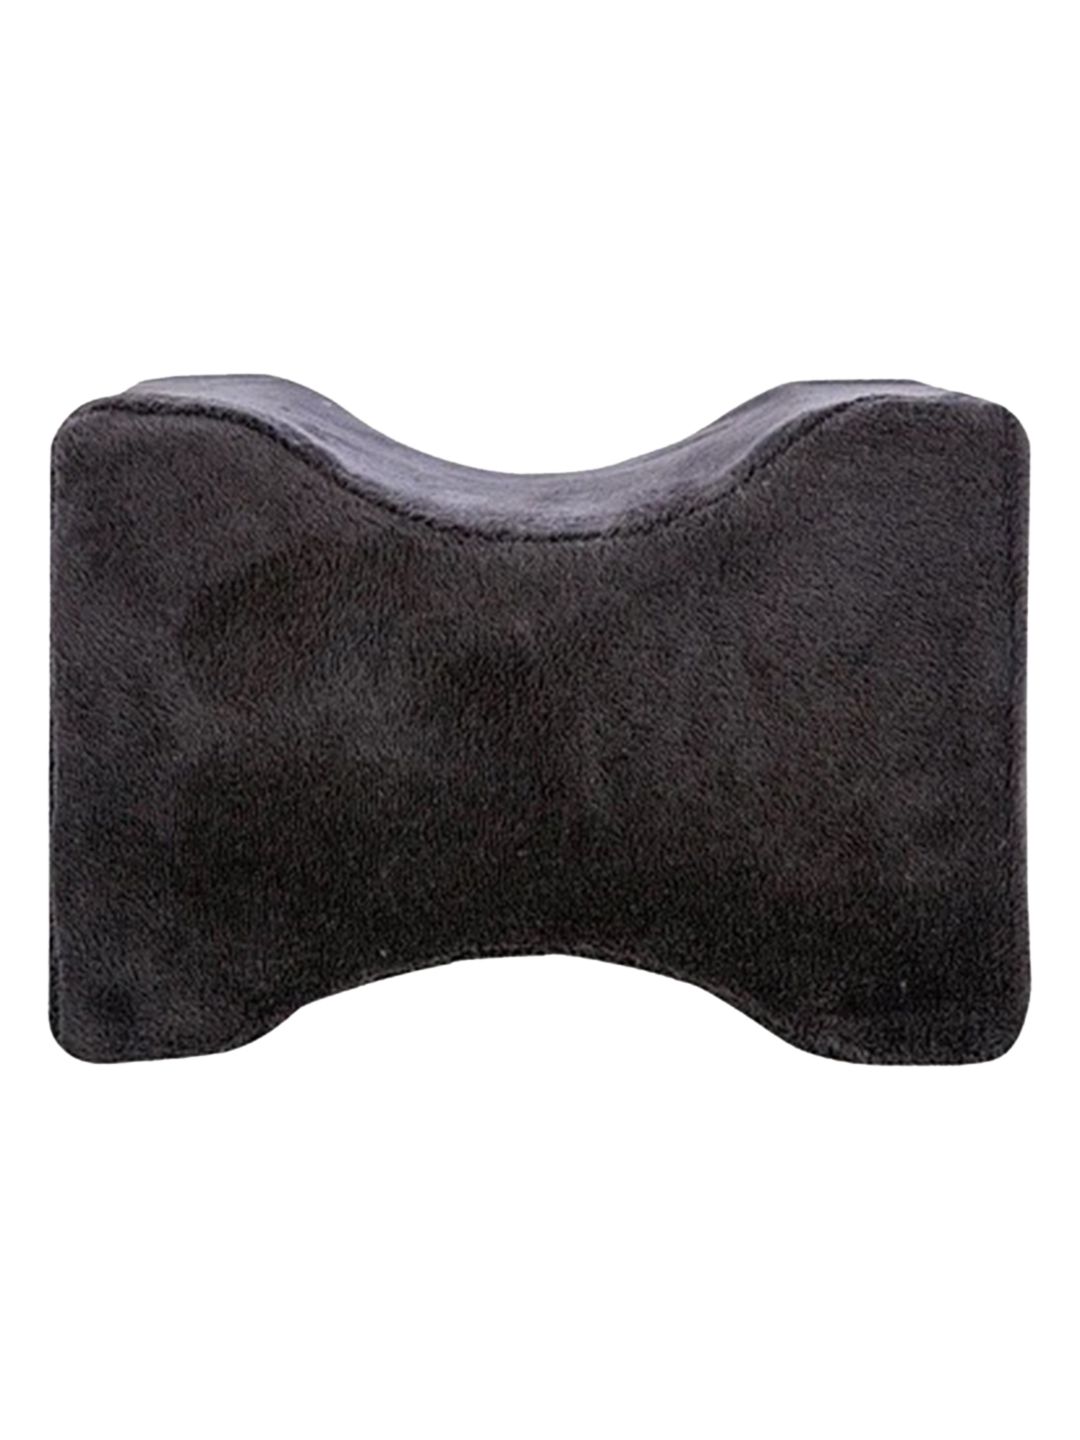 The White Willow Unisex Black Orthopedic Memory Foam Knee Support Leg Rest Pillow Price in India